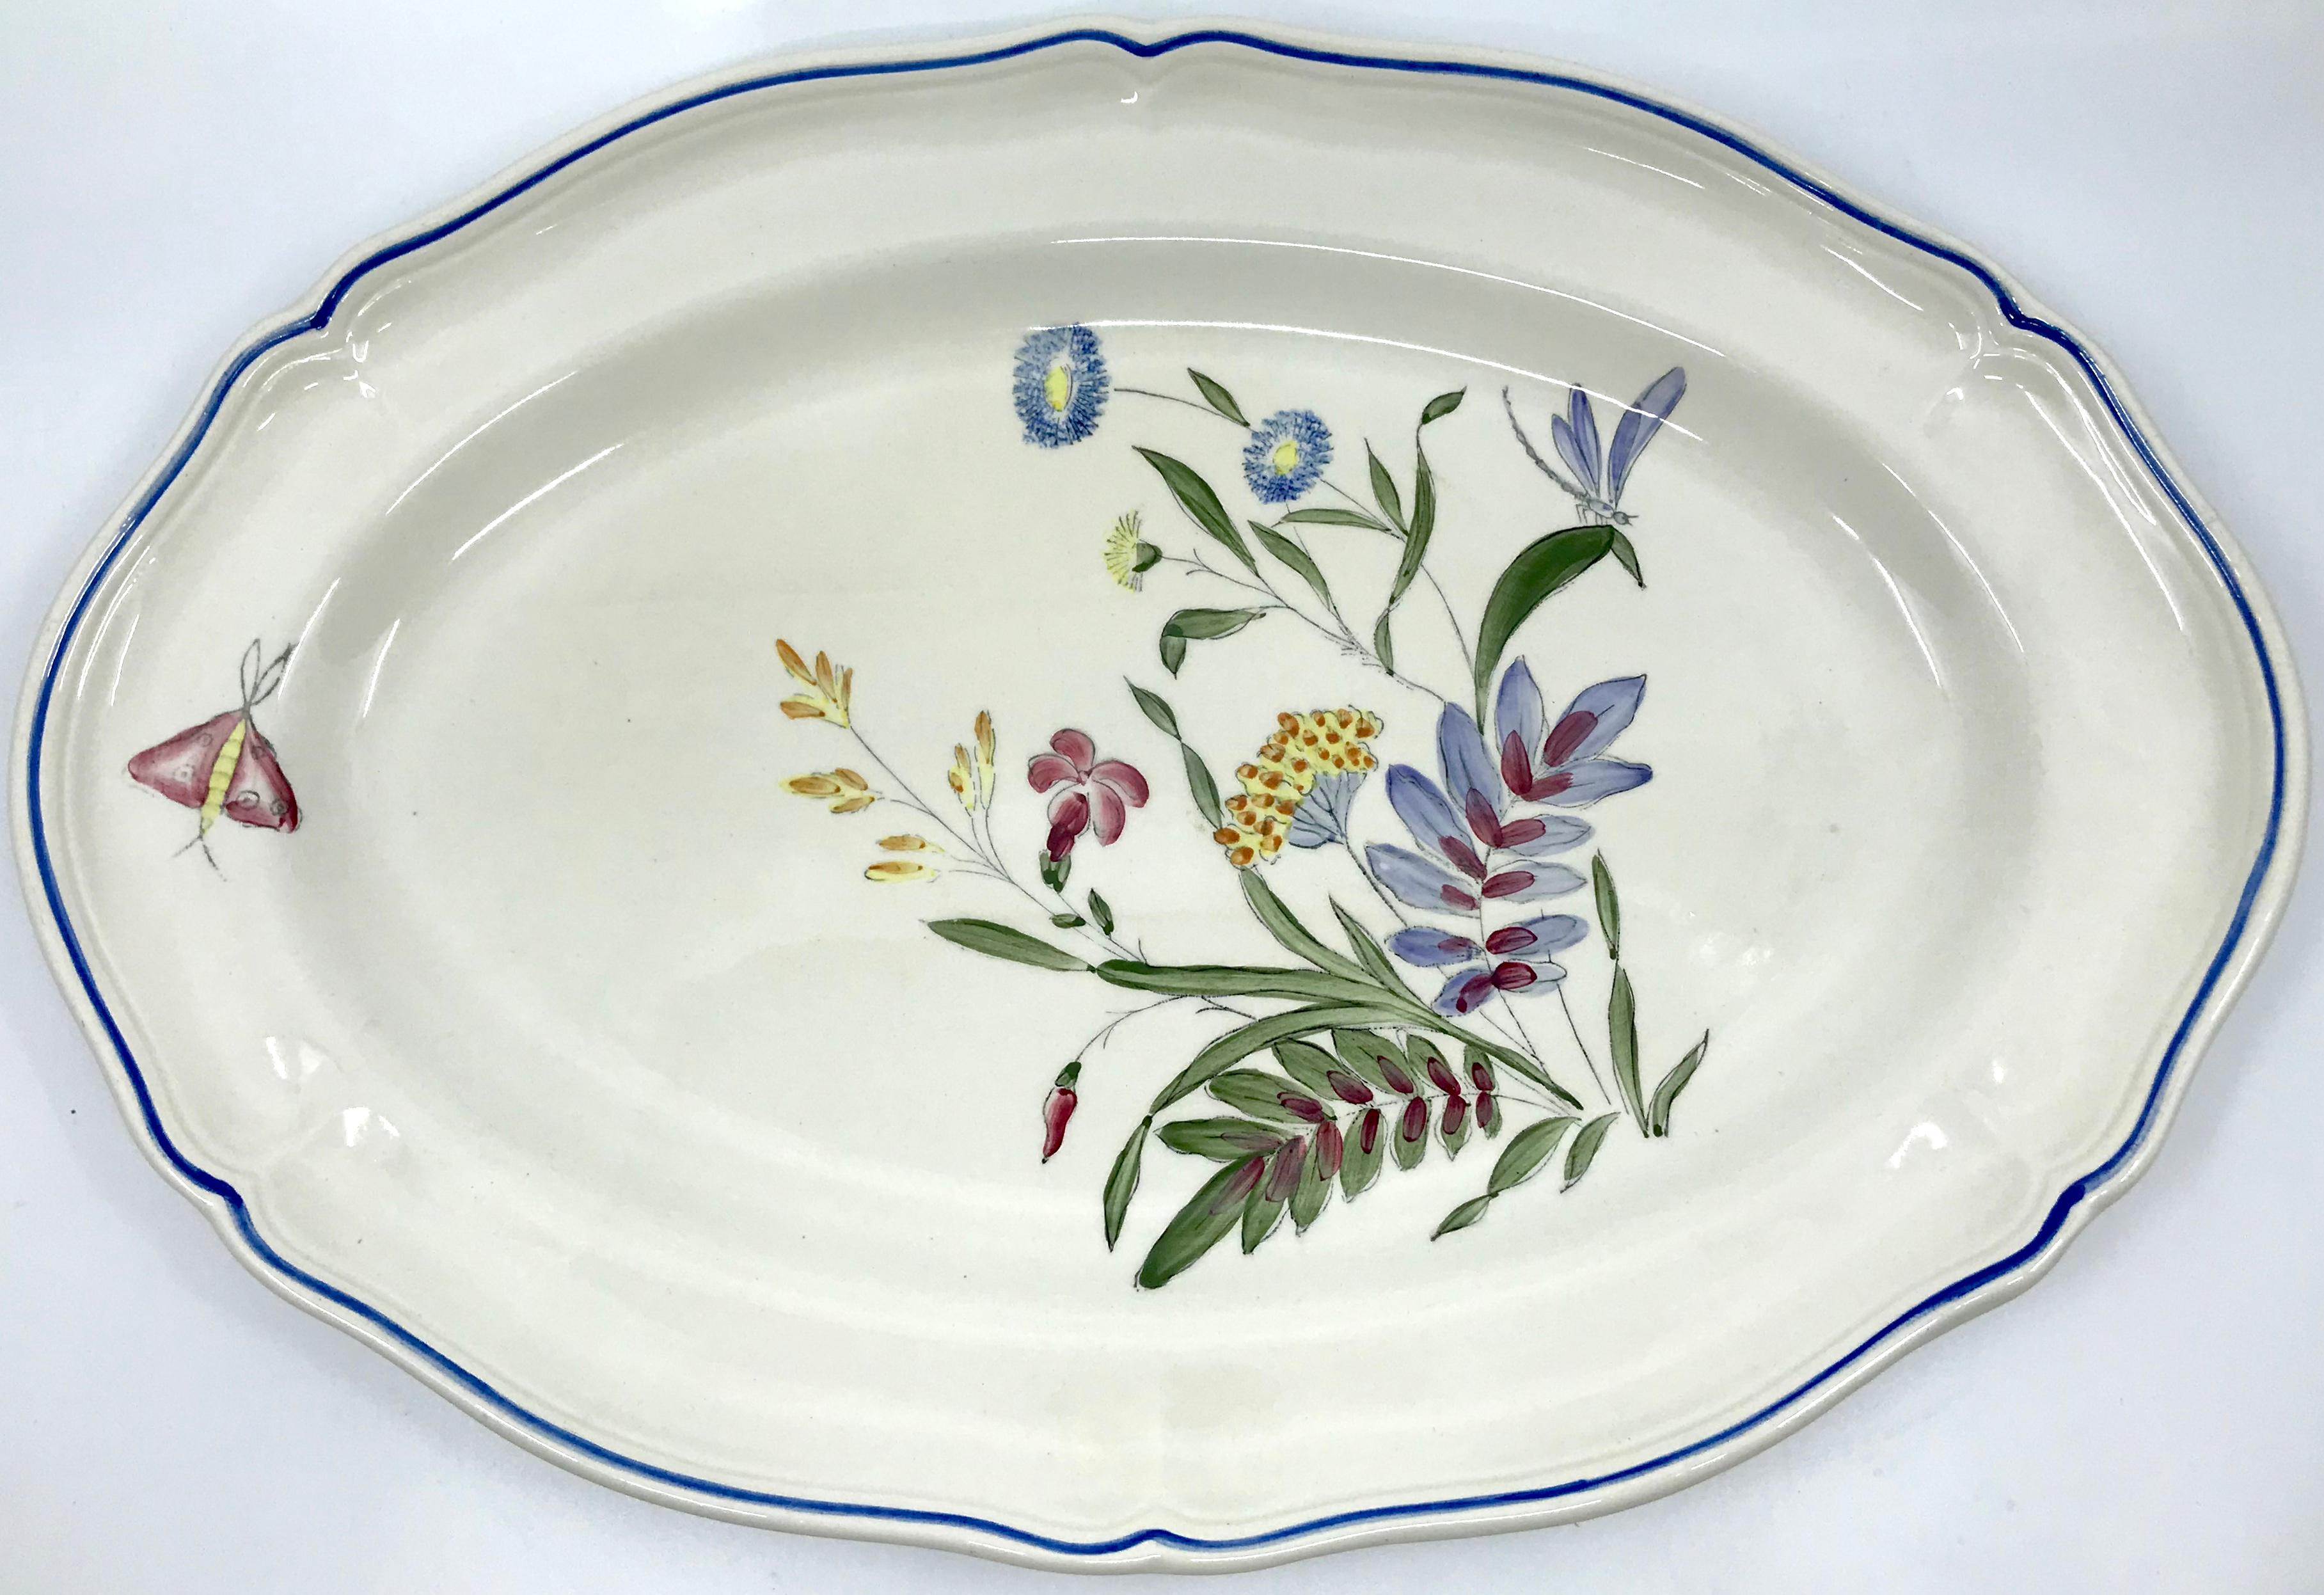 Blue, white, yellow and magenta floral platter. Blue rimmed and shaped border ovoid platter with hand painted country floral sprig in greens, yellow blue and magenta with butterfly. Longchamps factory. France, mid 20th century
Dimensions: 16.5